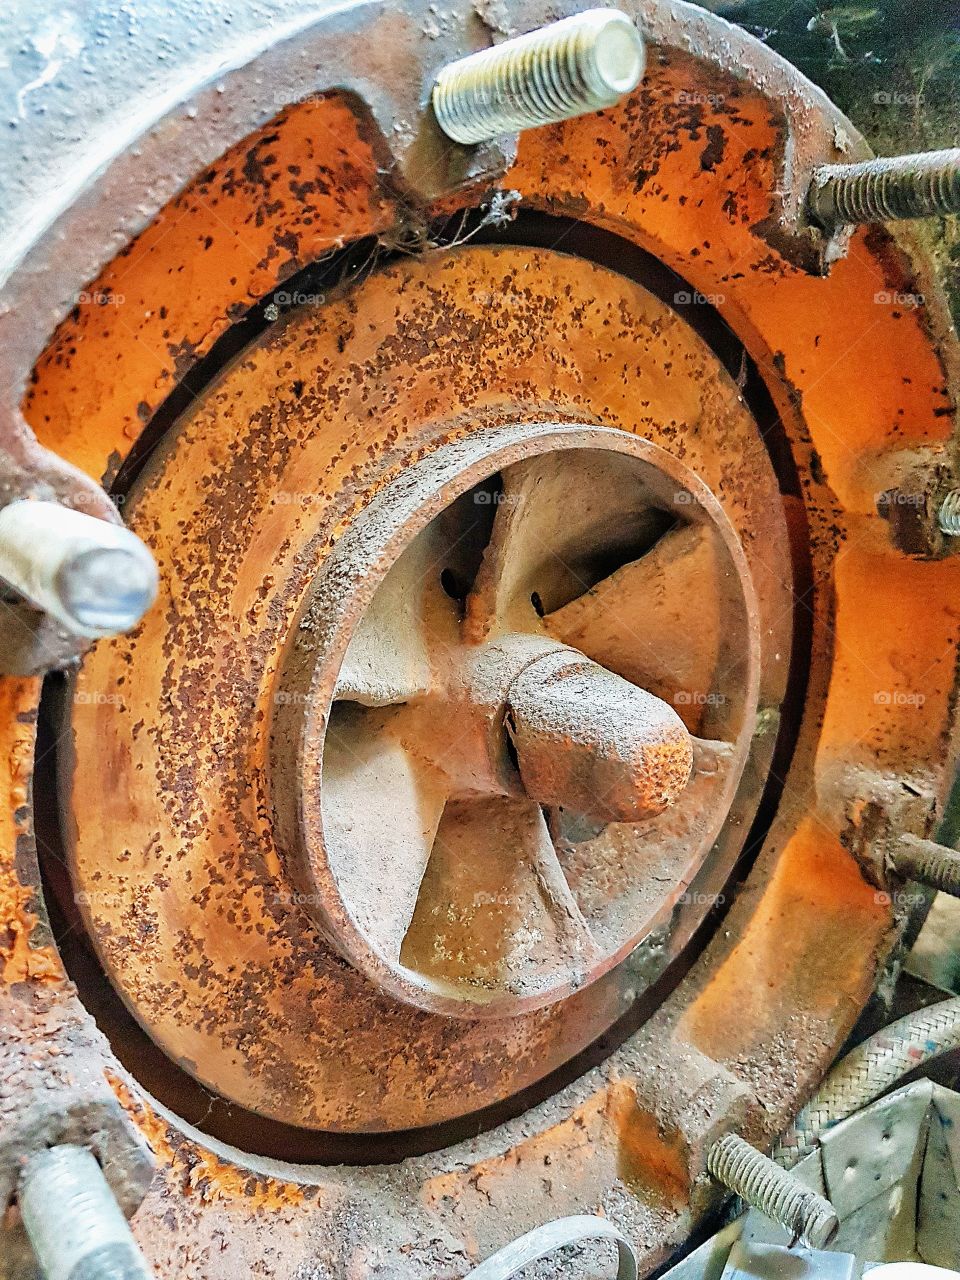 Rusted water pump